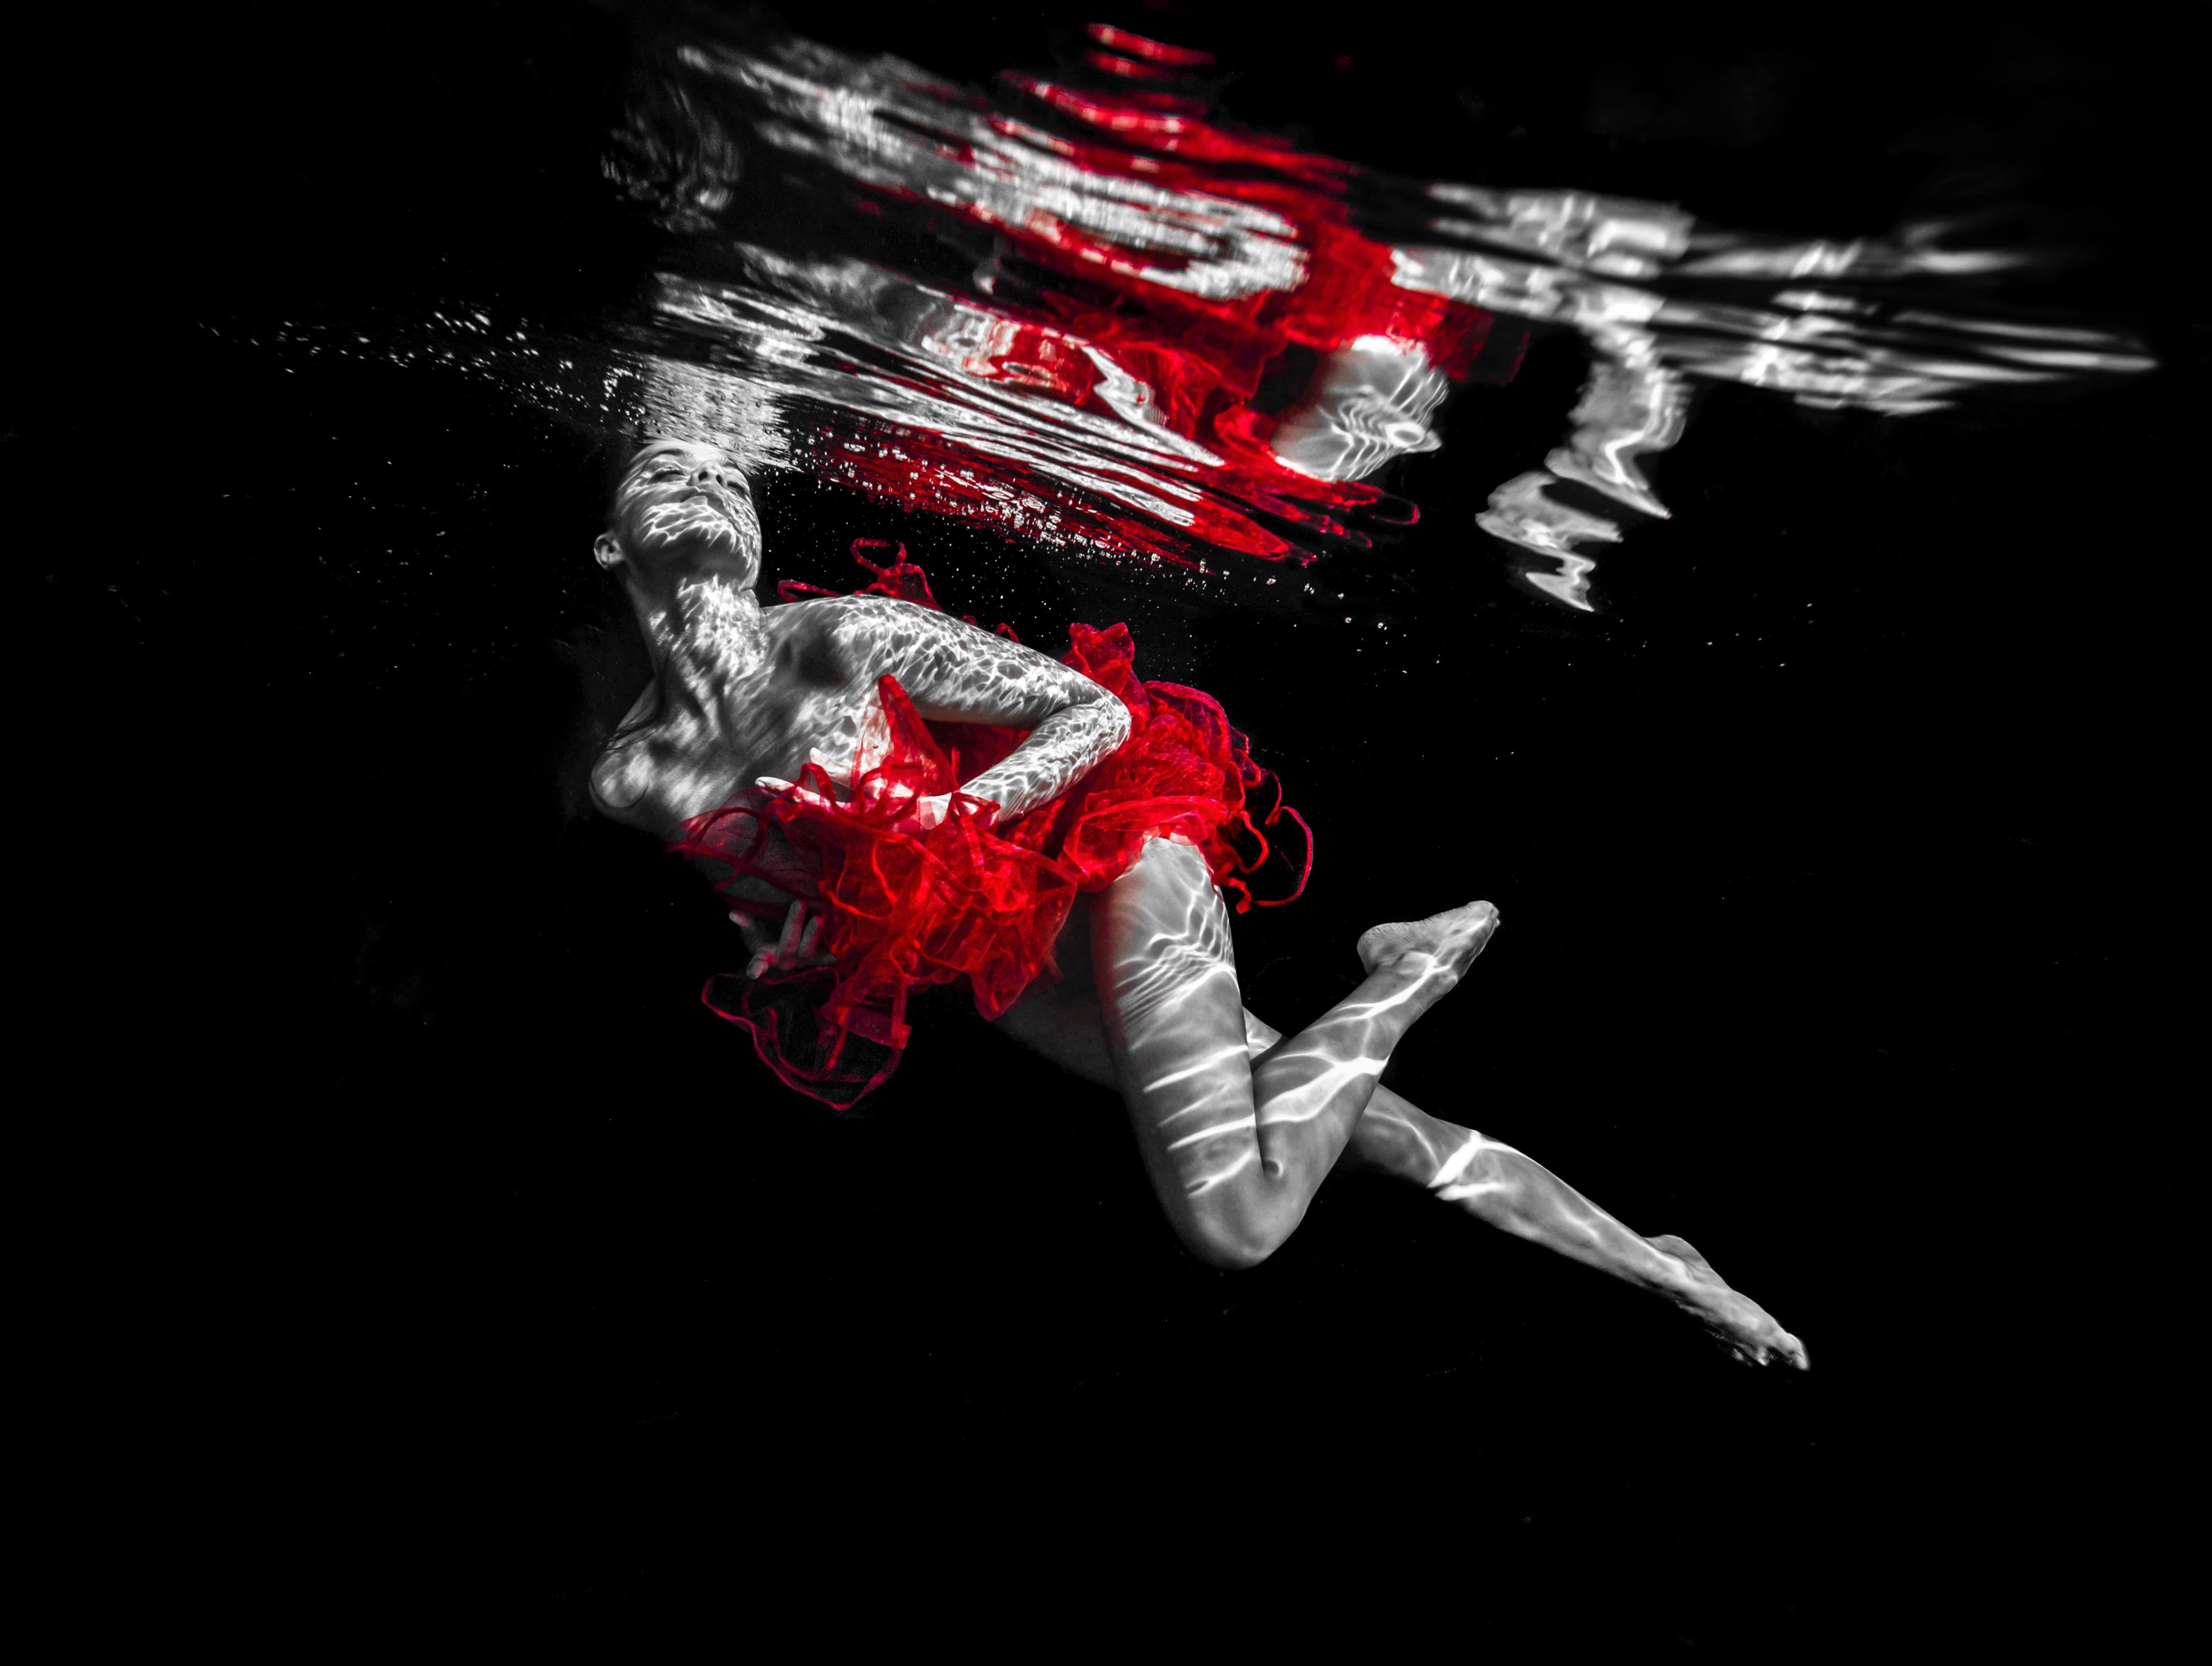 Alex Sher Nude Photograph - The Red Tutu - underwater nude photograph - print on paper 18" x 24"